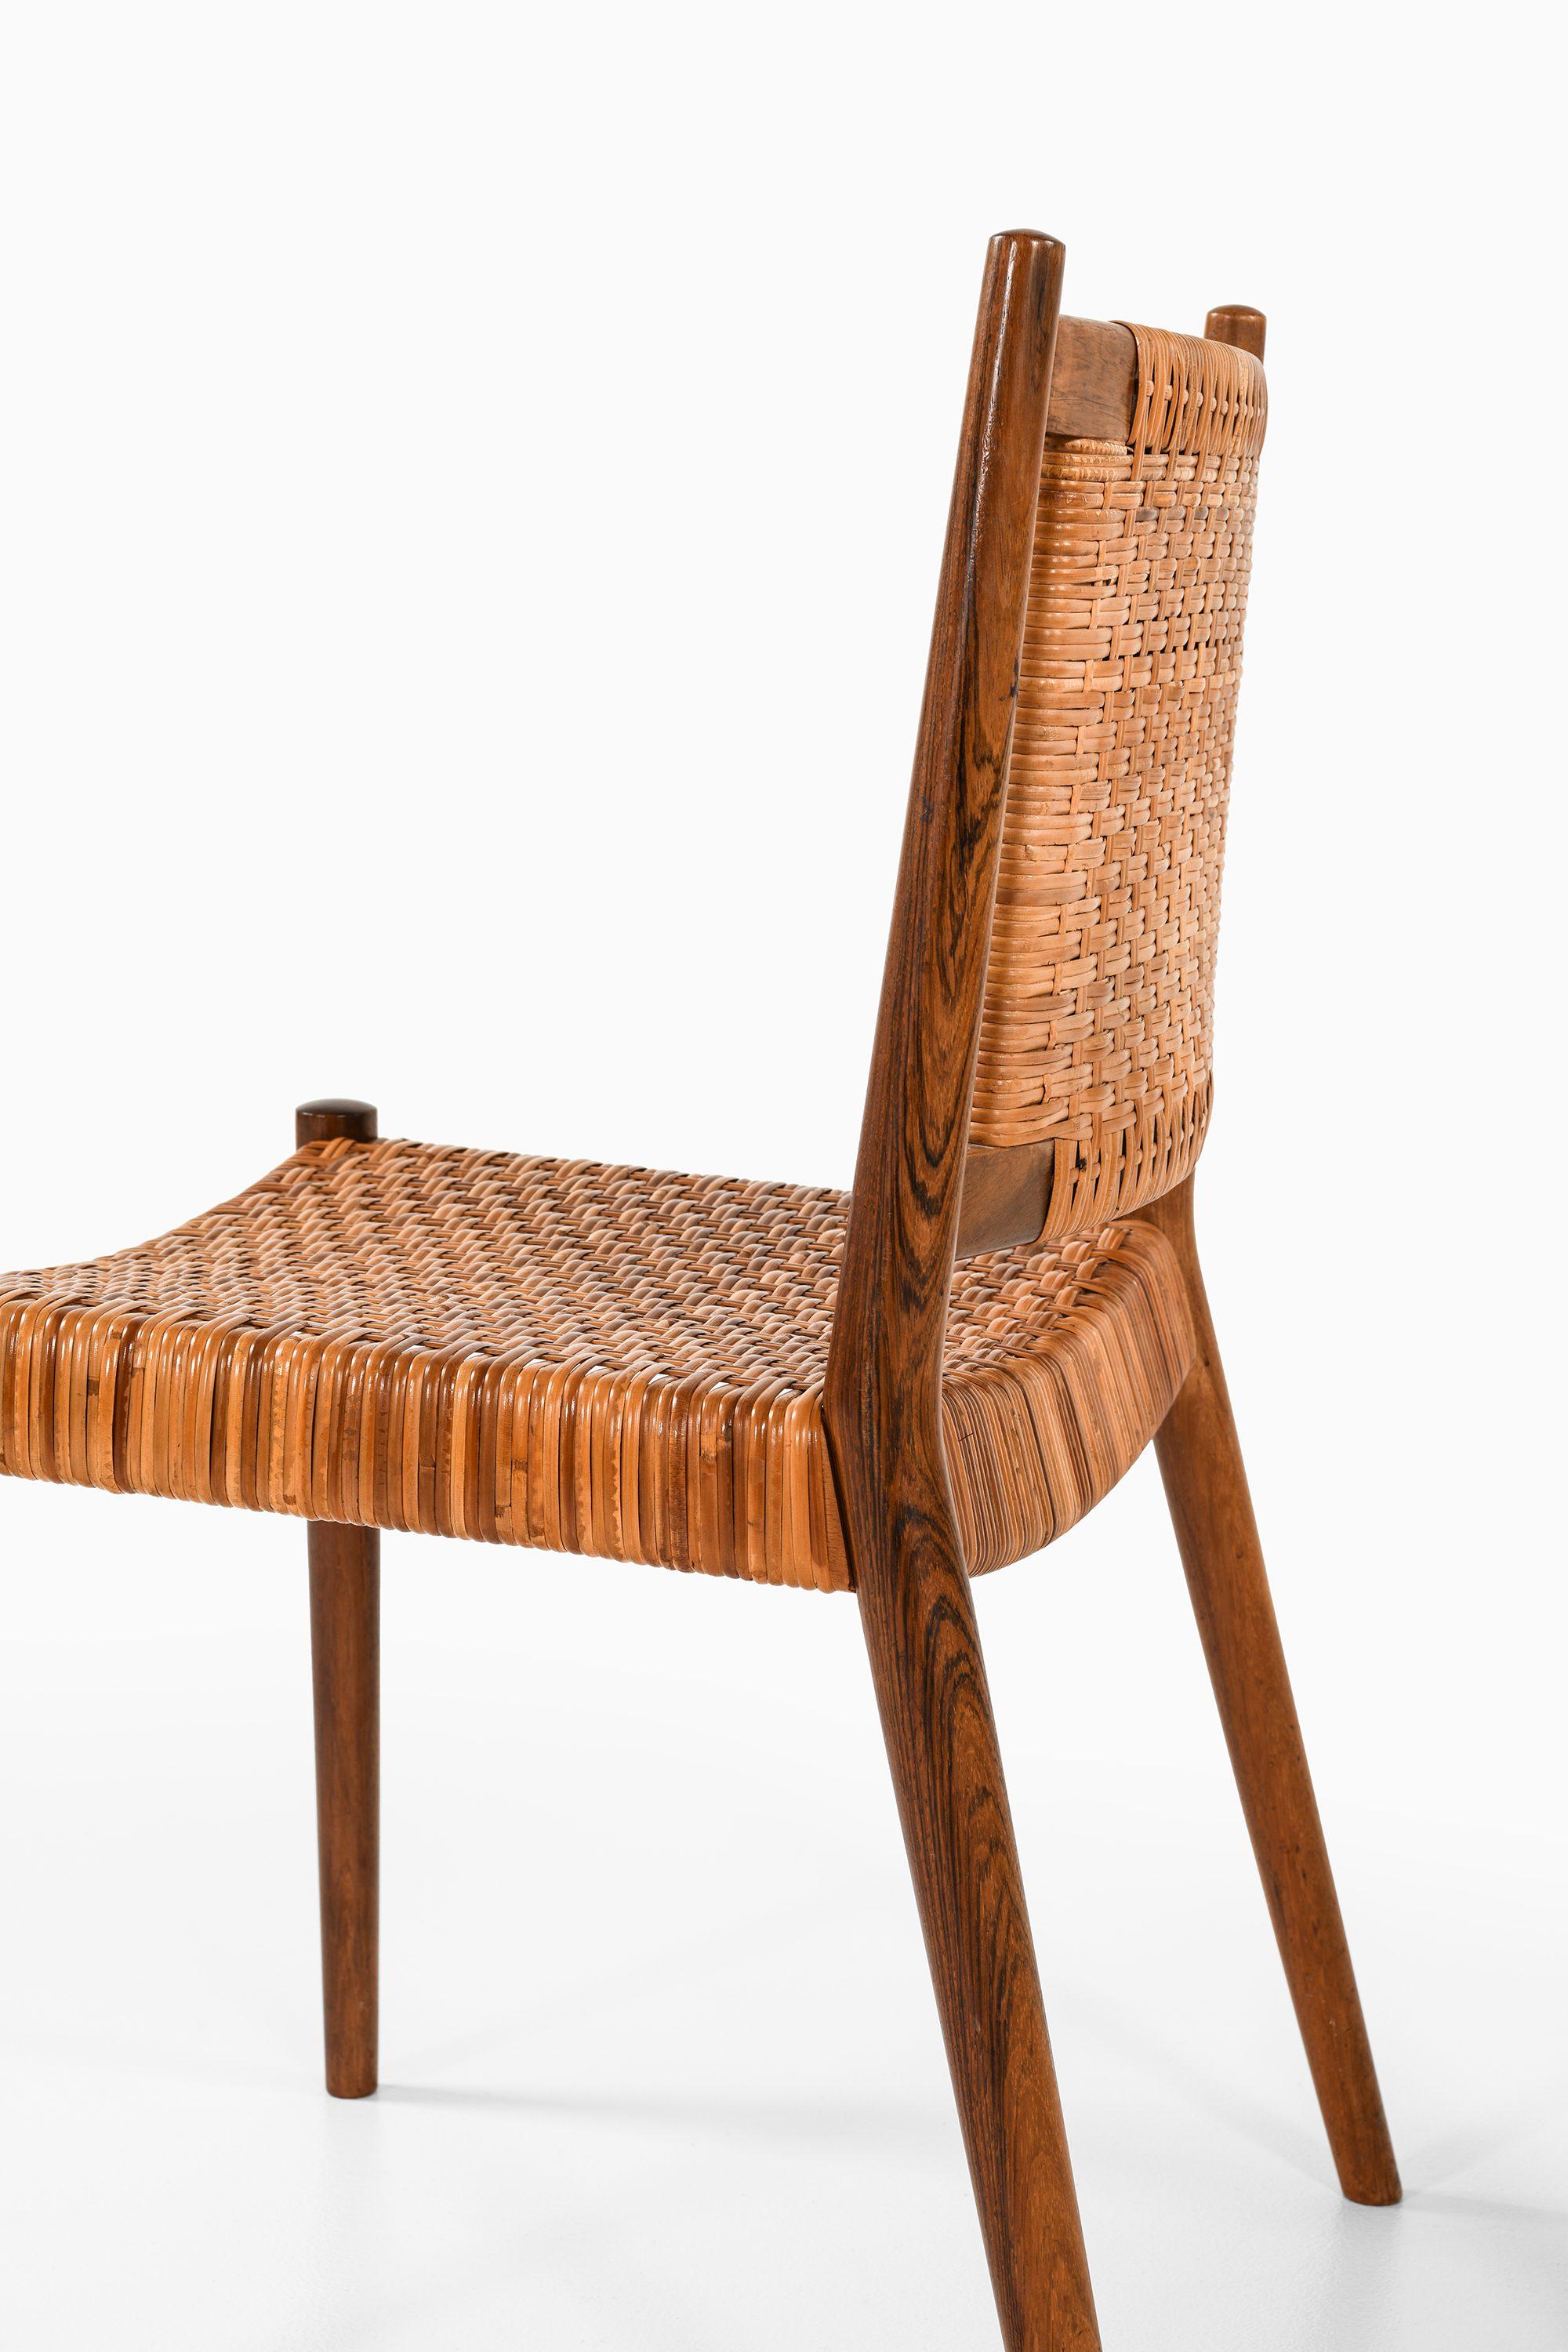 Set of 8 Dining Chairs in Rosewood and Woven Cane by Steffan Syrach-Larsen, 1960 For Sale 1